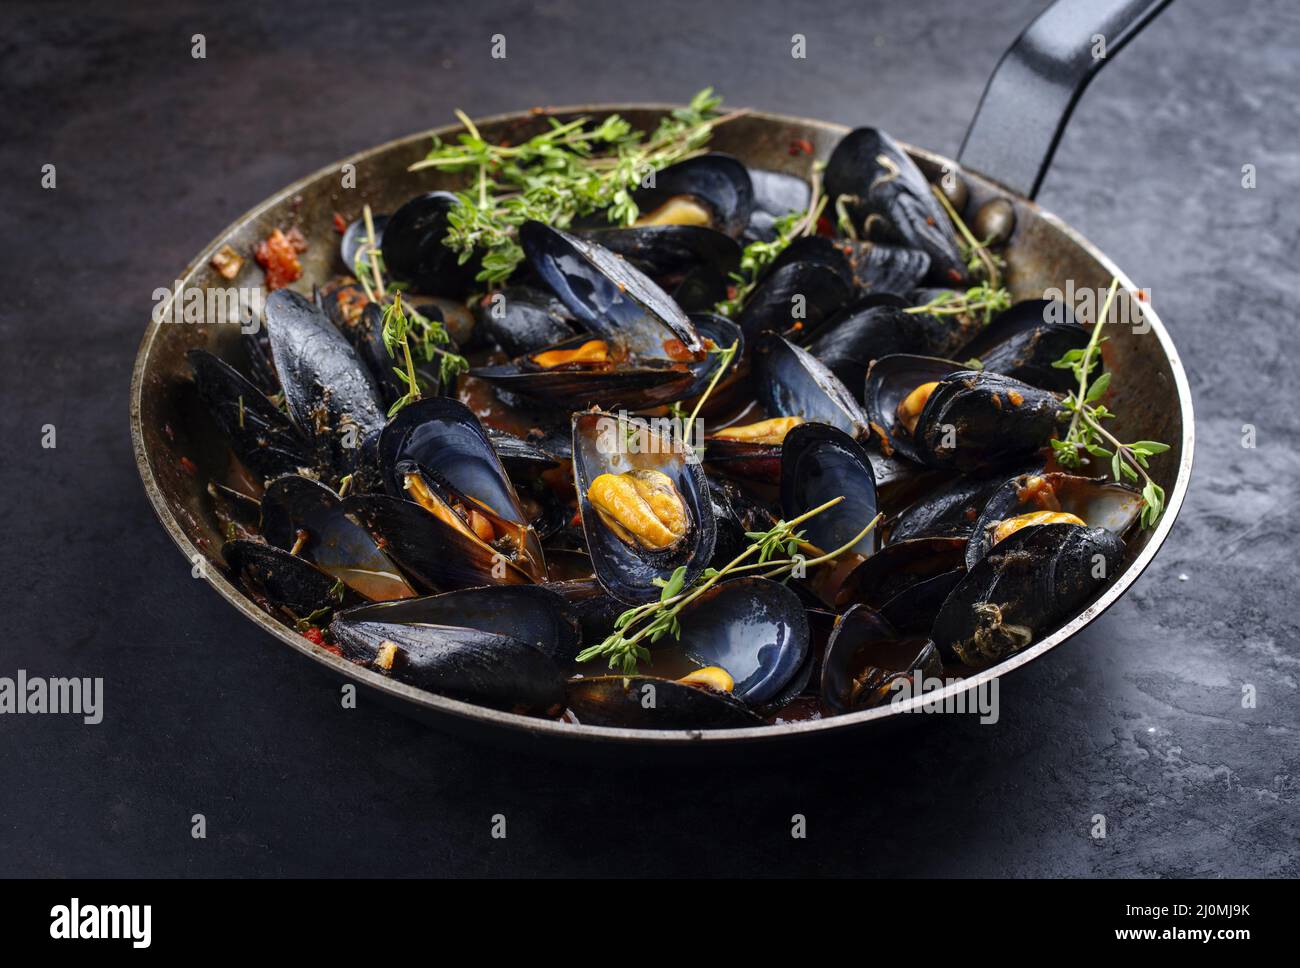 Traditional barbecue Italian blue mussel in tomato red wine sauce with herb and garlic as close-up in a rustic iron pan Stock Photo